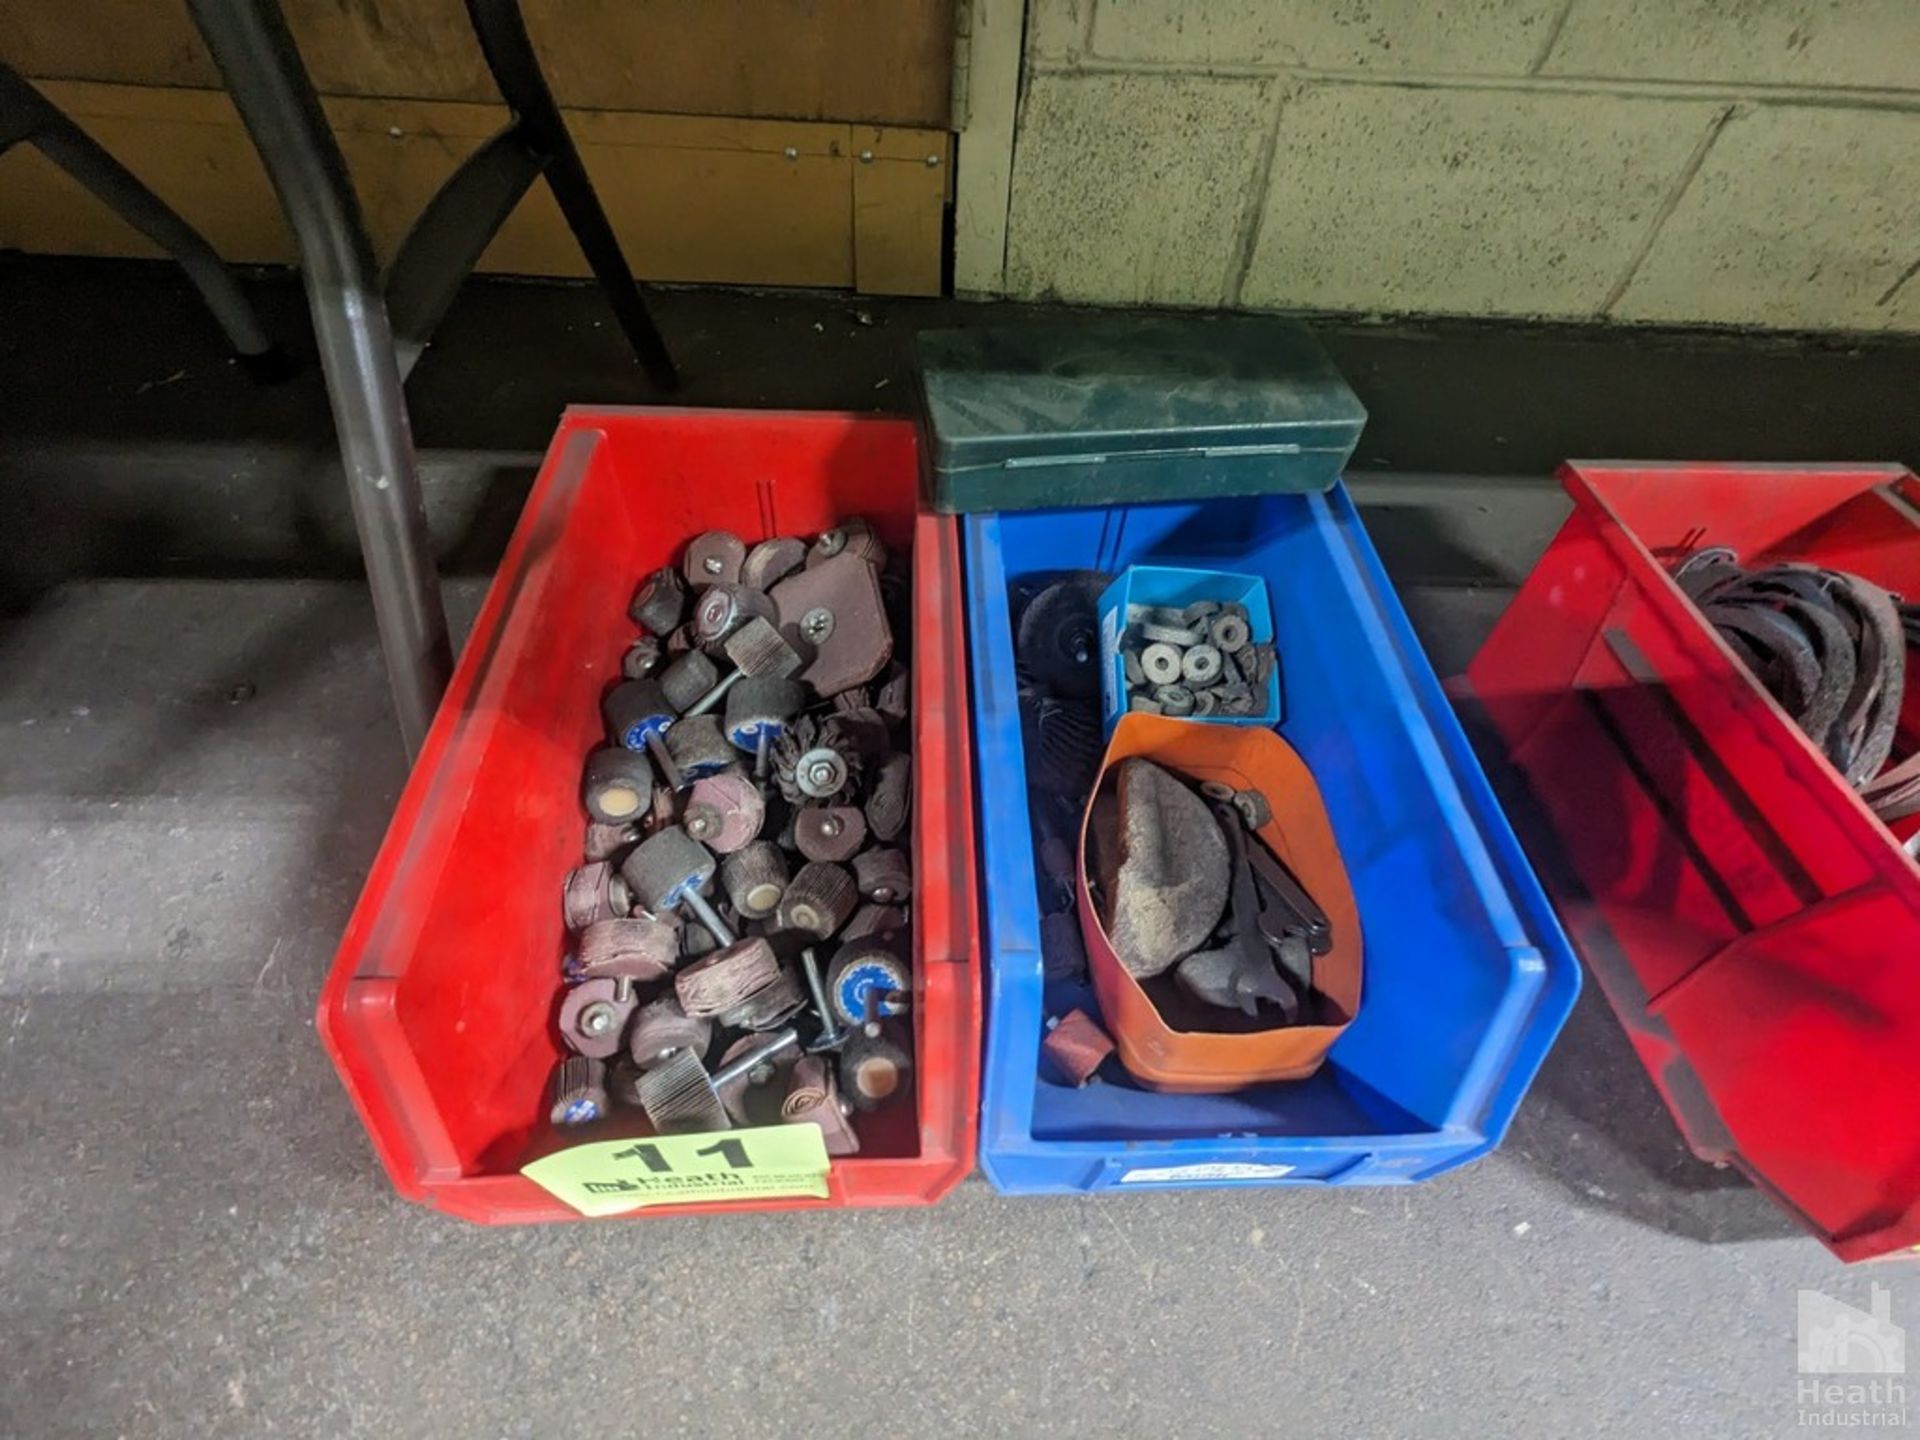 (2) BINS WITH ASSORTED ABRASIVE GRINDING WHEELS